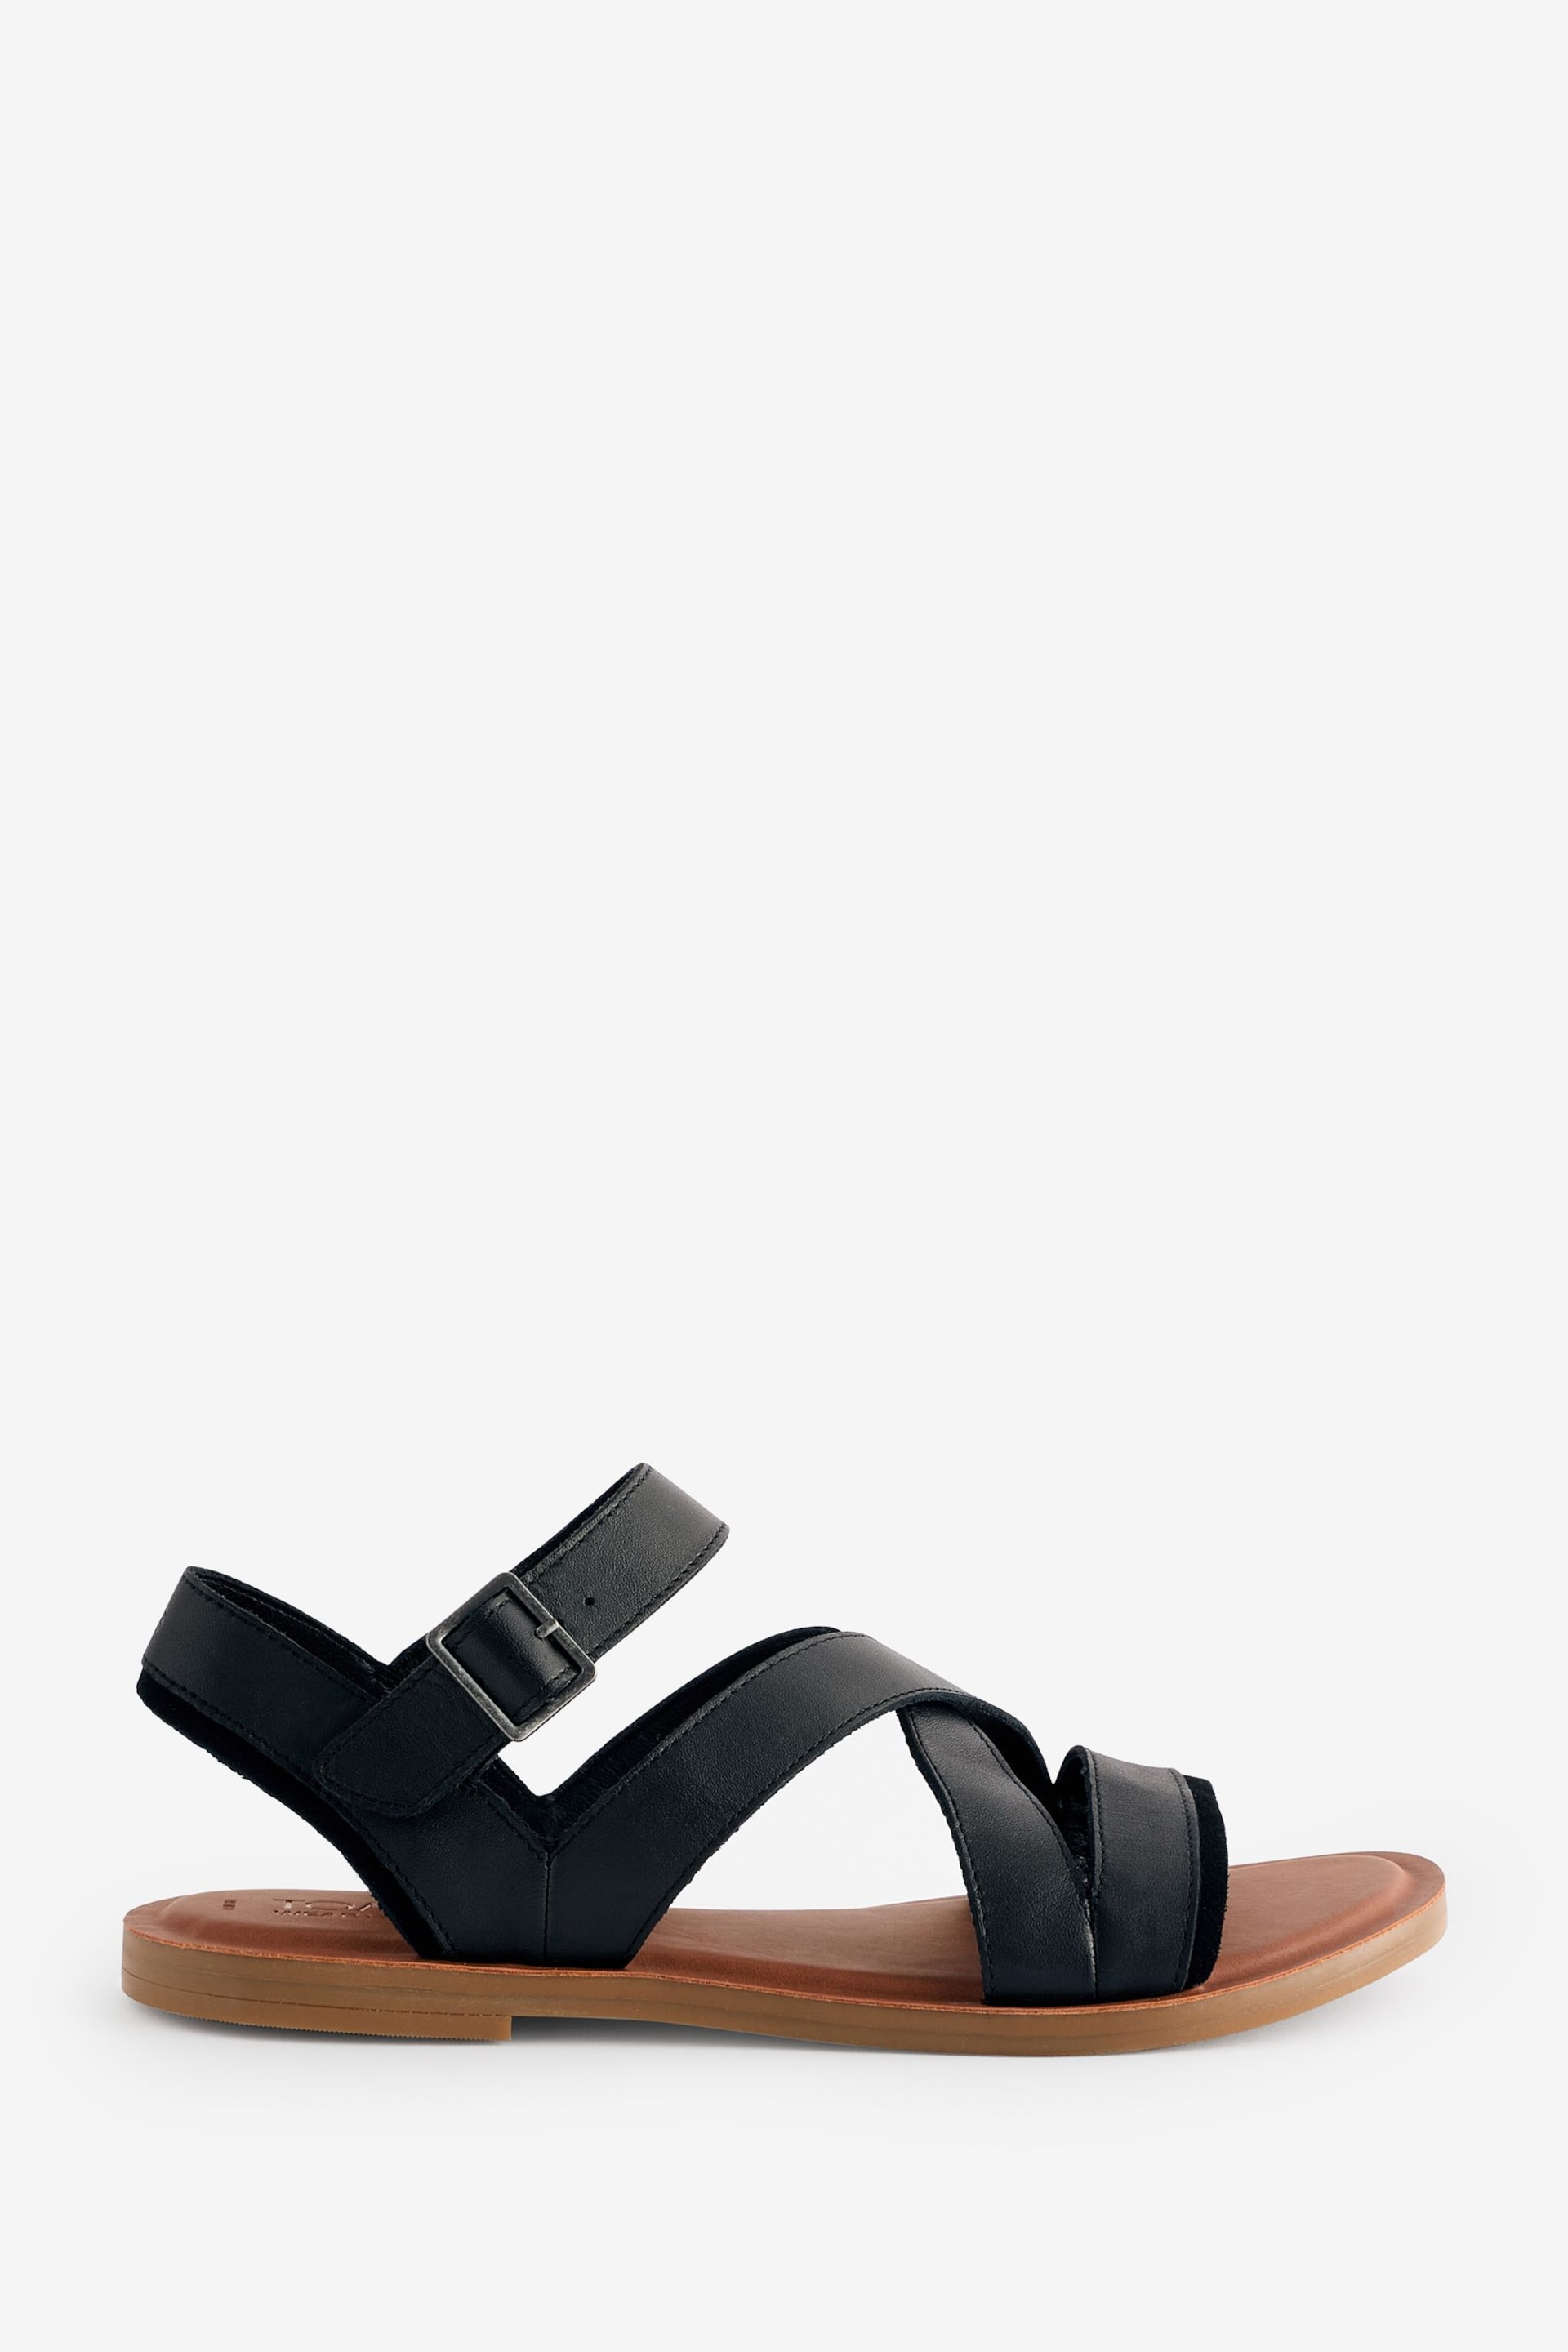 TOMS Sloane Black Sandals In Leather - Image 2 of 6